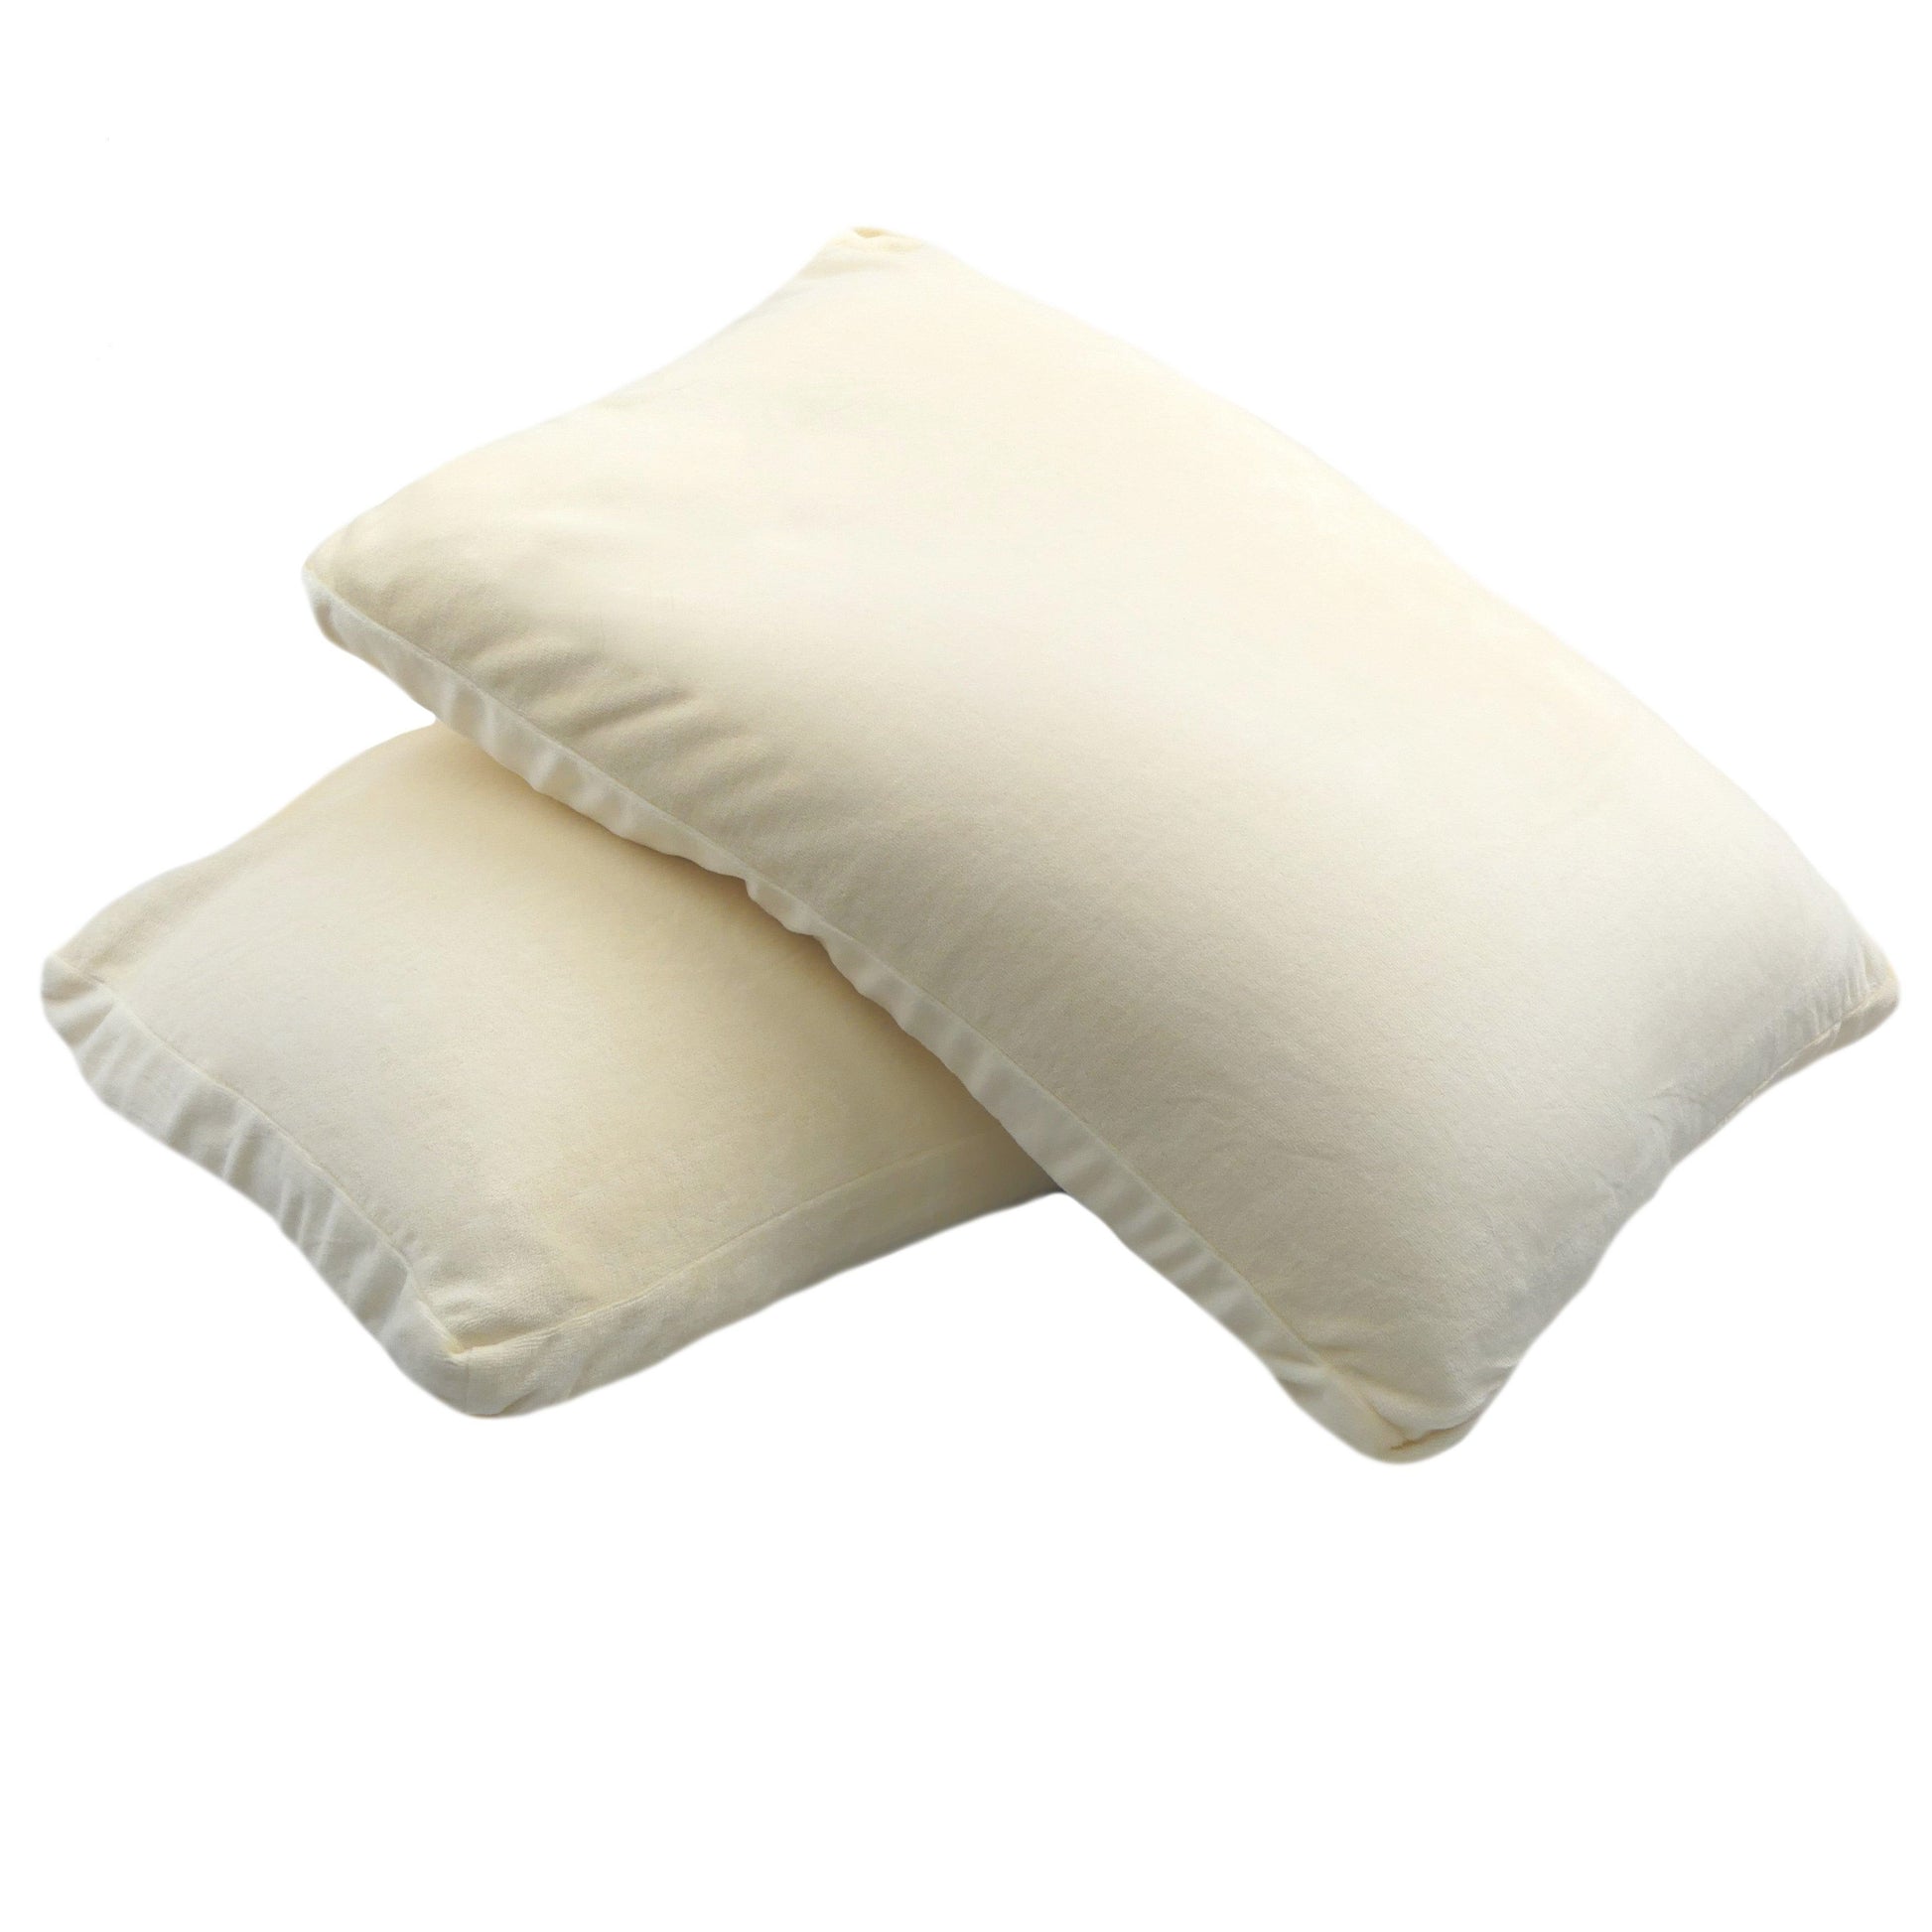 Multi-Purpose Pillow with Head Protection Gusset - M103